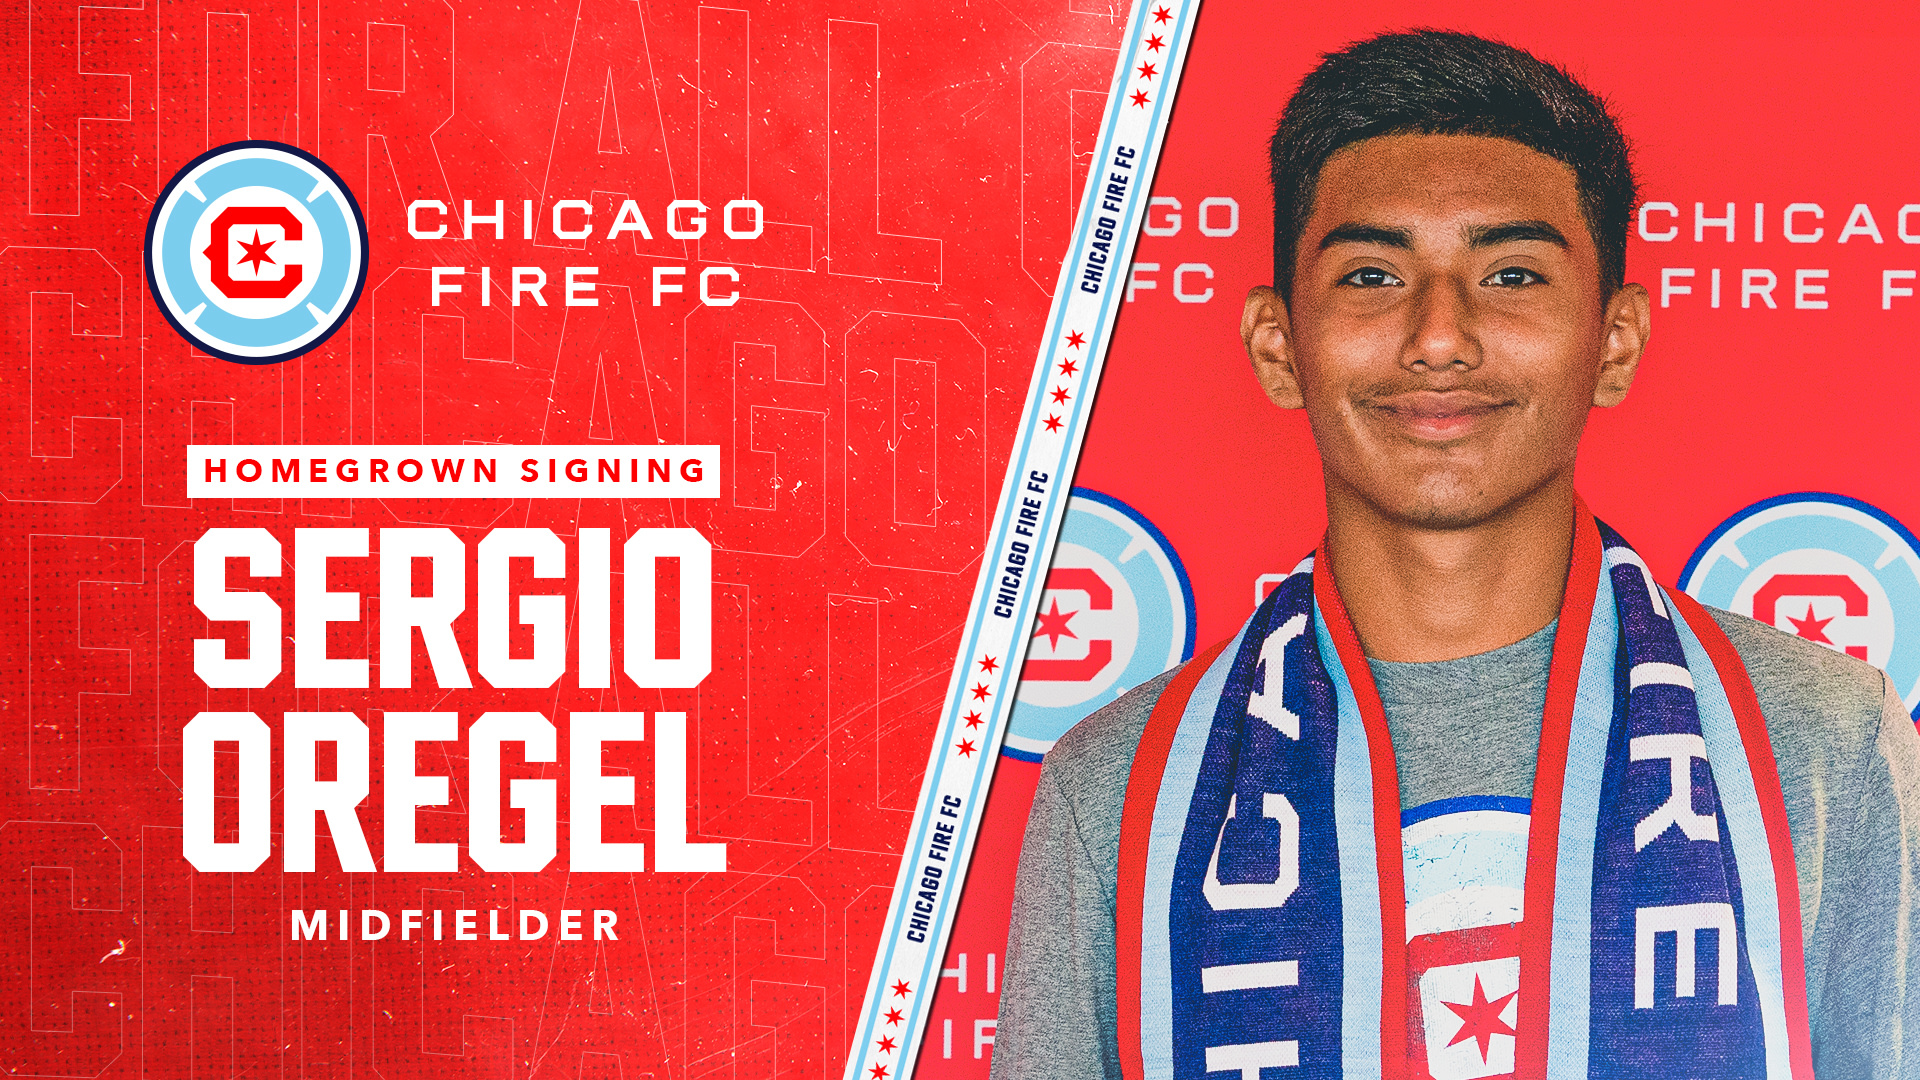 Chicago Fire Fc Sign Academy Midfielder Sergio Oregel To Homegrown Player Contract Chicago Fire Fc